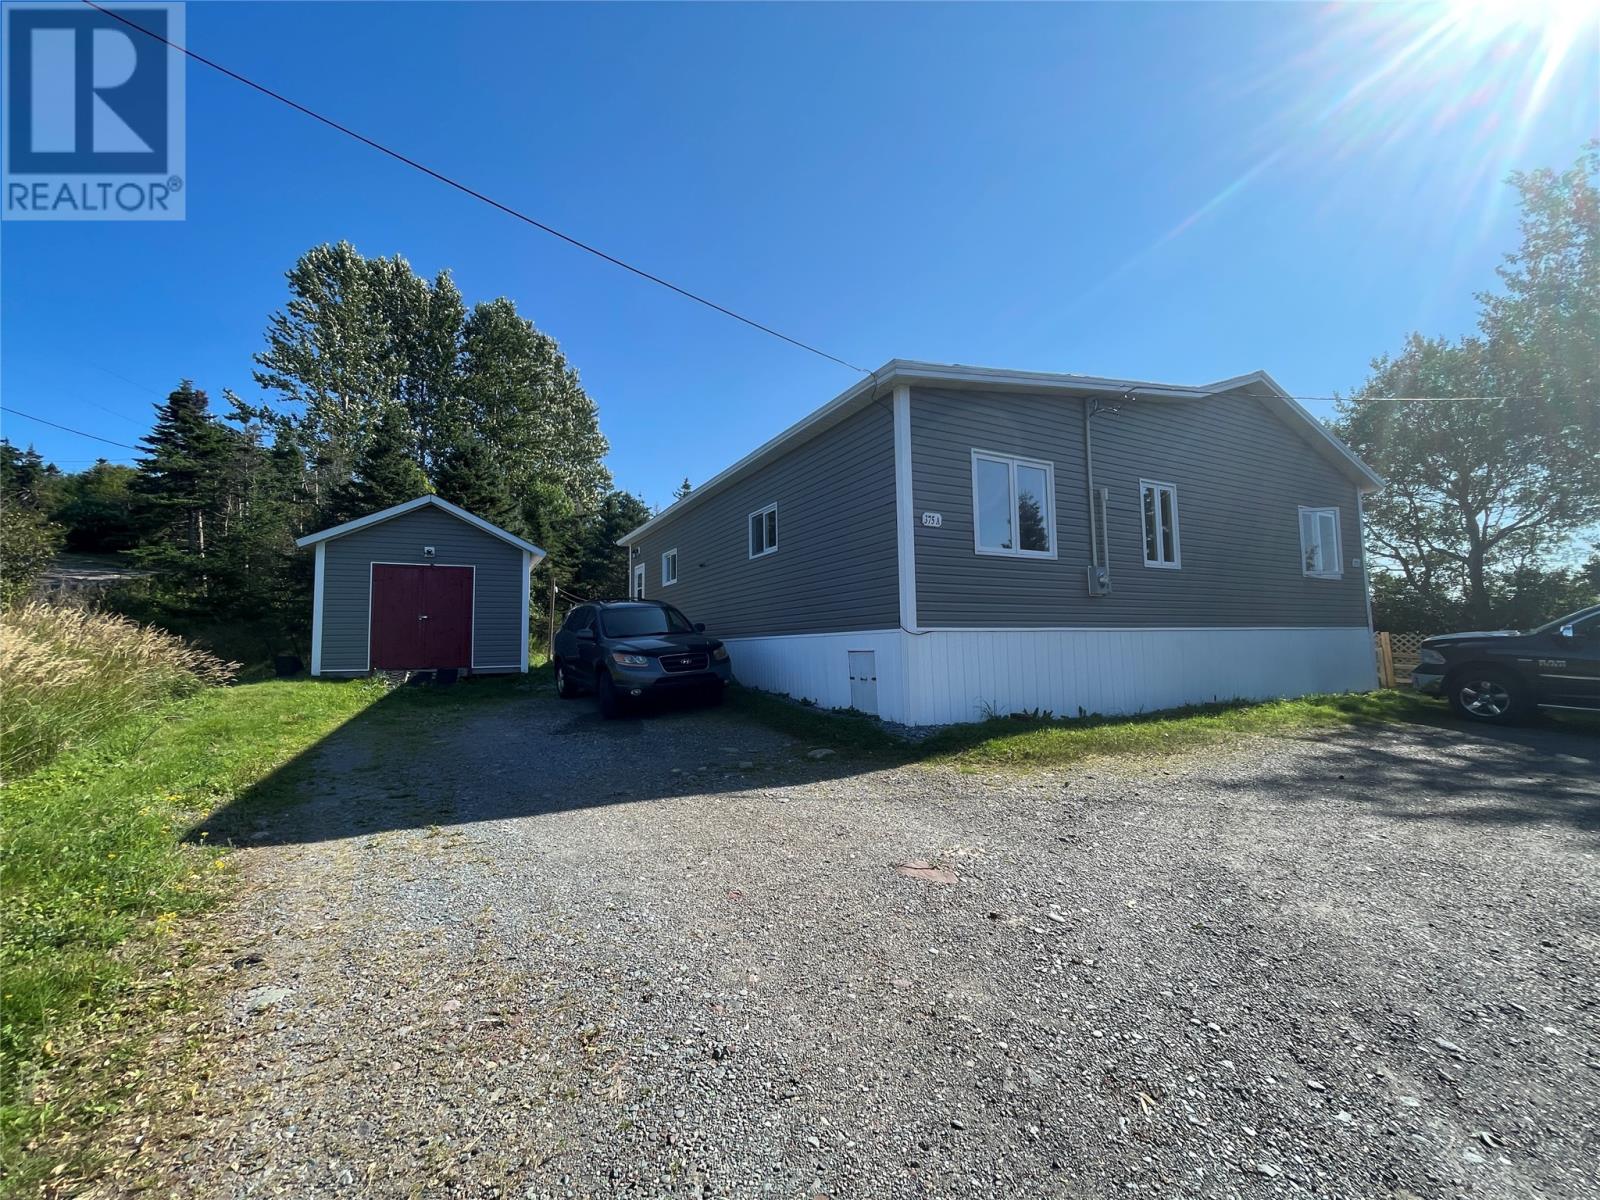 375 A & B Creston Boulevard, Marystown, A0E2M0, 3 Bedrooms Bedrooms, ,2 BathroomsBathrooms,Single Family,For sale,Creston,1256848